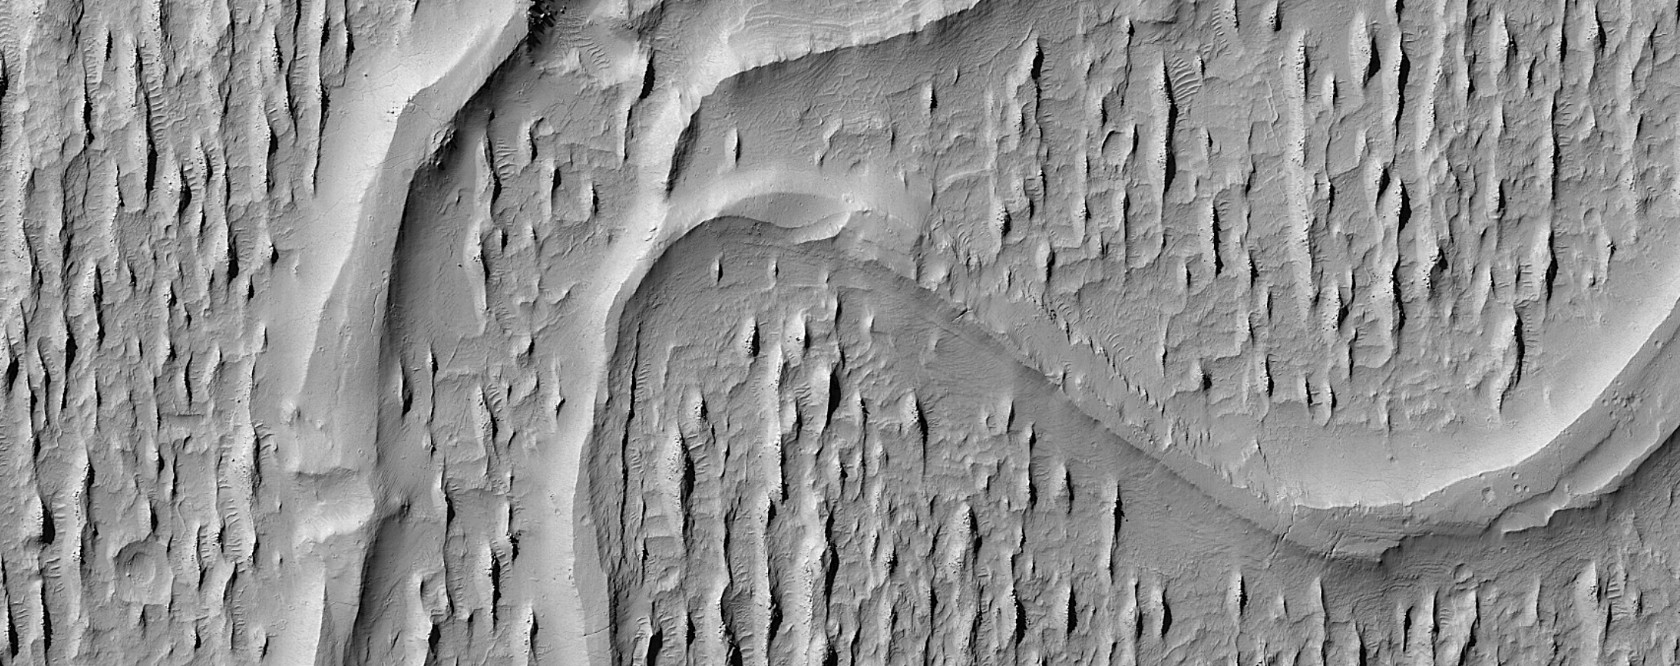 Flowing Rivers on Ancient Mars